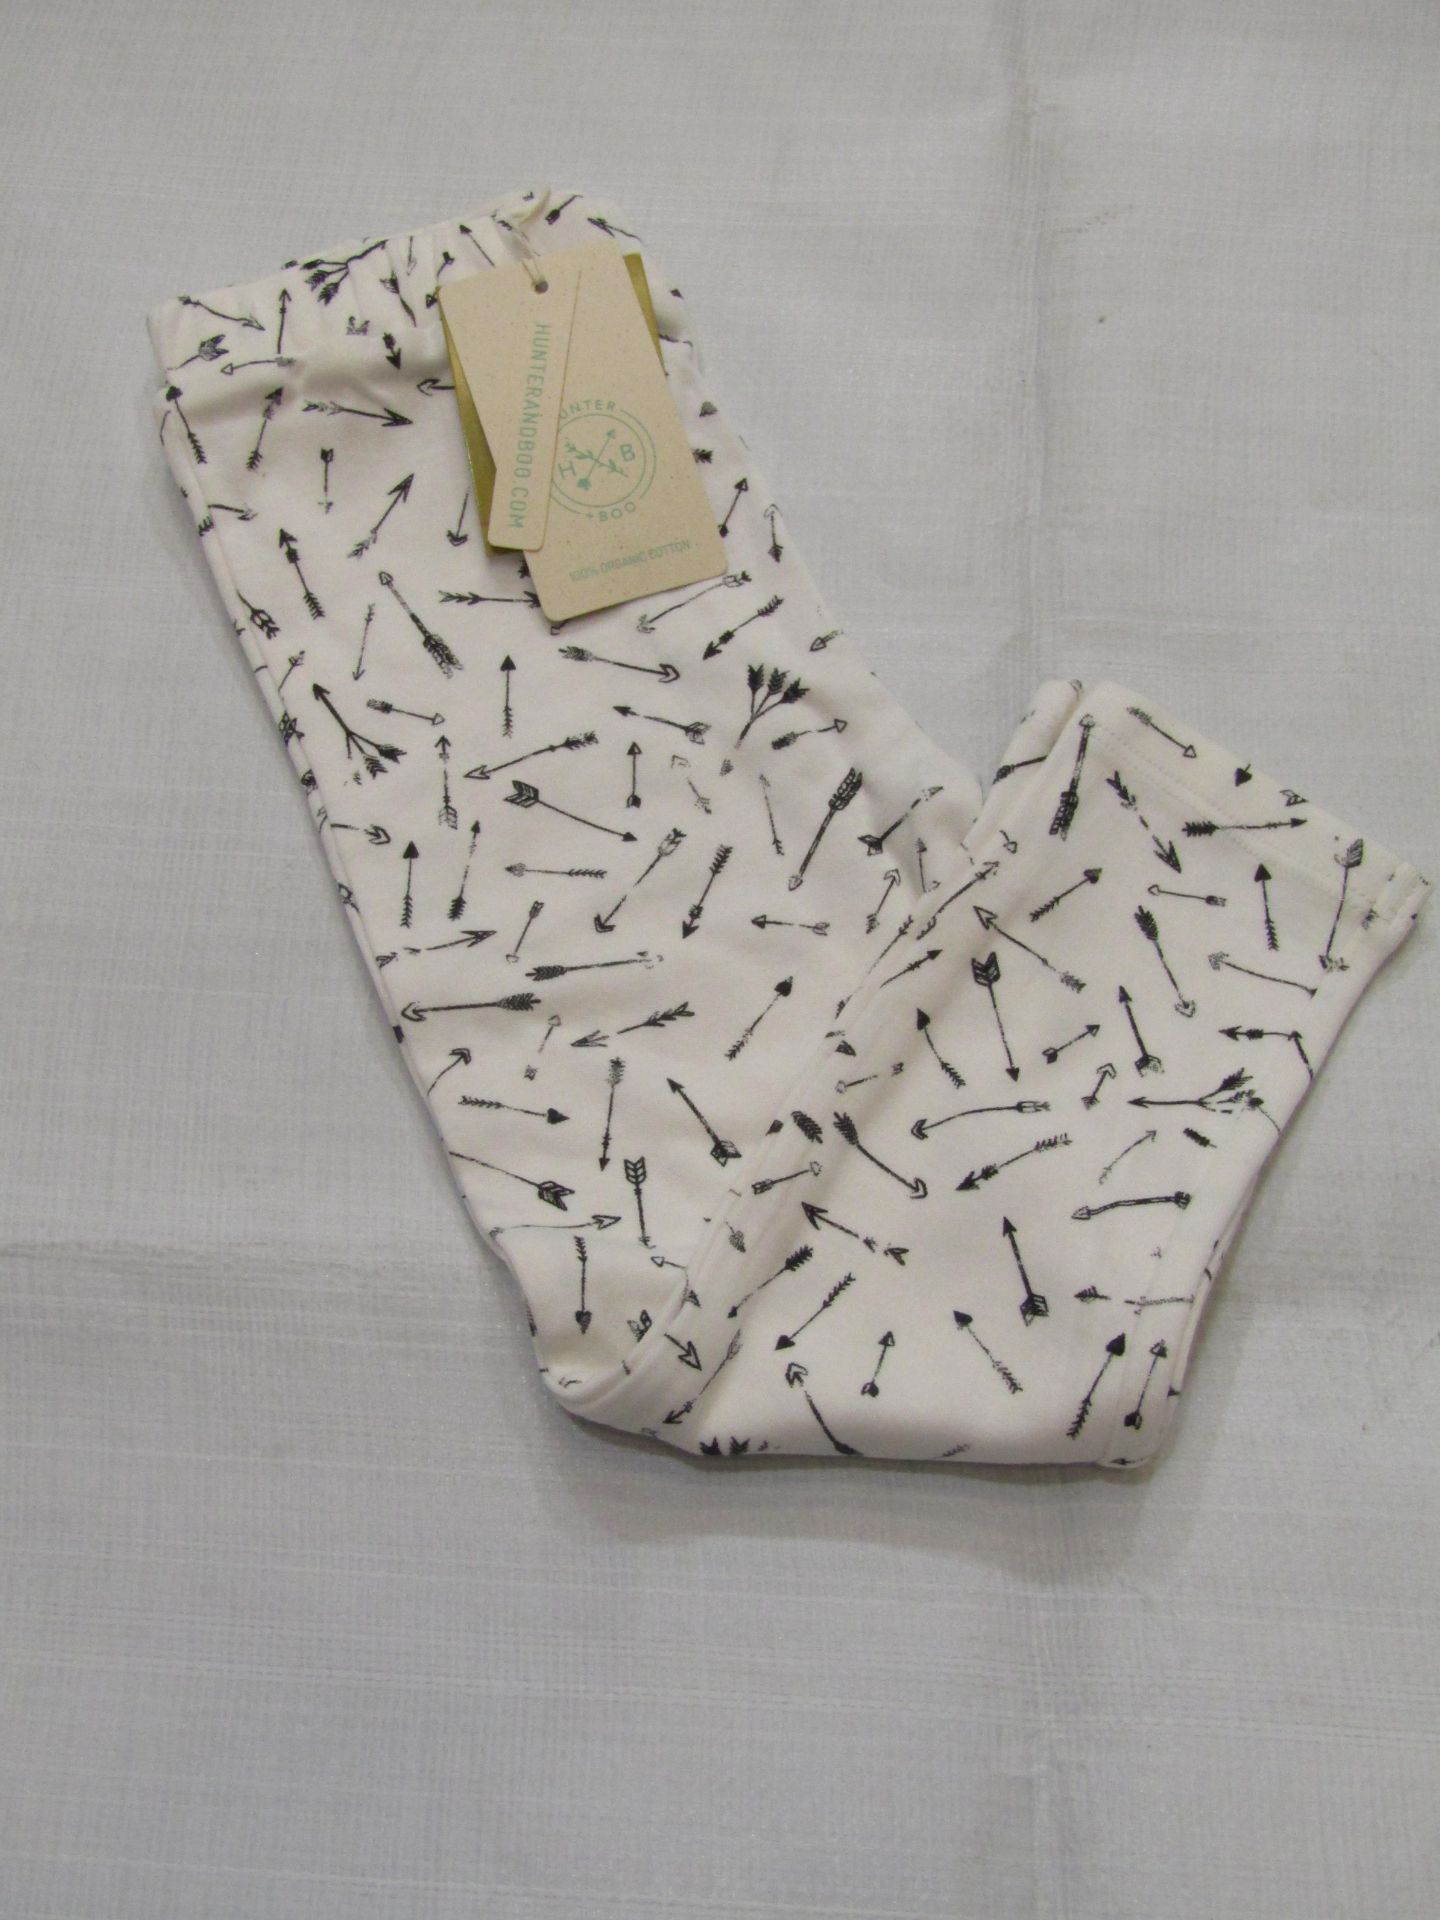 2 X Hunter & Boo Arrow Print Leggings Aged 2-3 yrs New & Packaged RRP £13 Each - Image 2 of 2